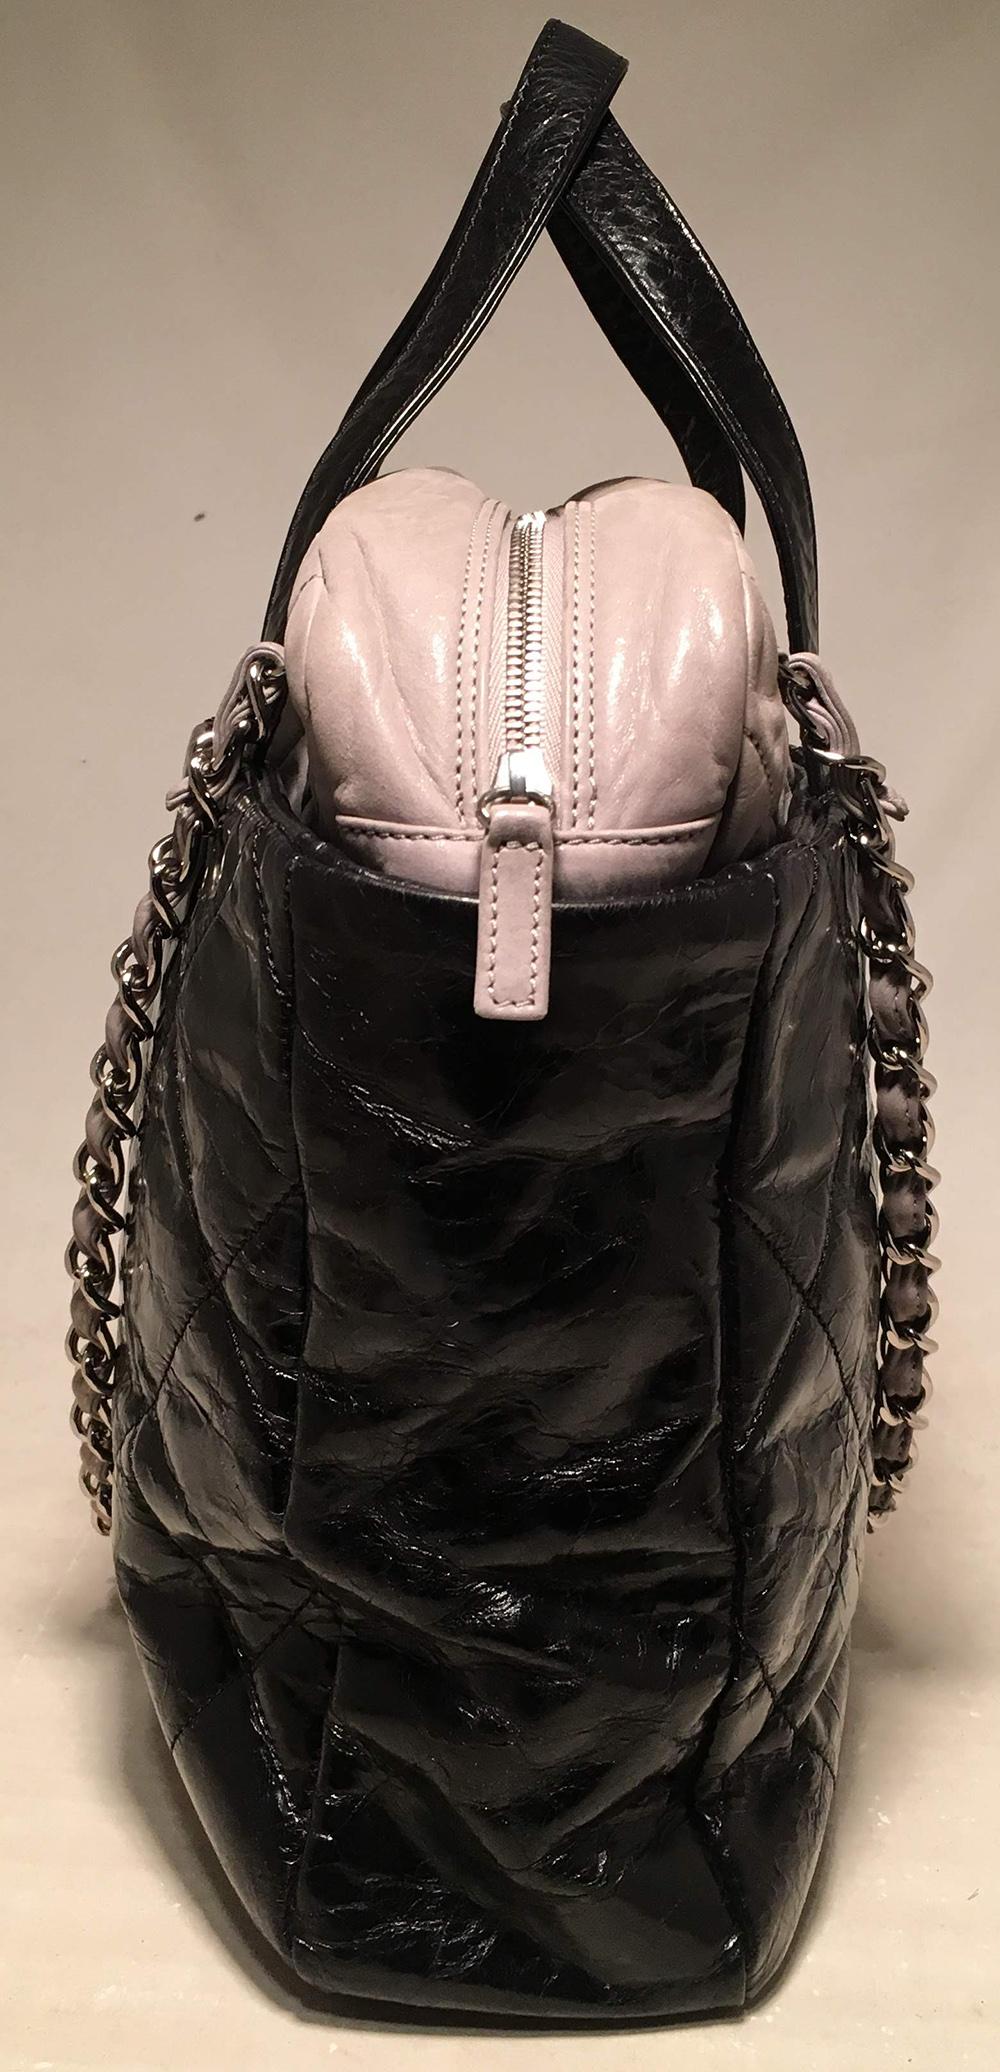 Chanel Black and Grey Leather Portobello Tote in very good condition. Distressed quilted black leather with grey shimmery soft calfskin leather top trimmed with double handles and woven chain and leather shoulder straps. Silver hardware trim and CC